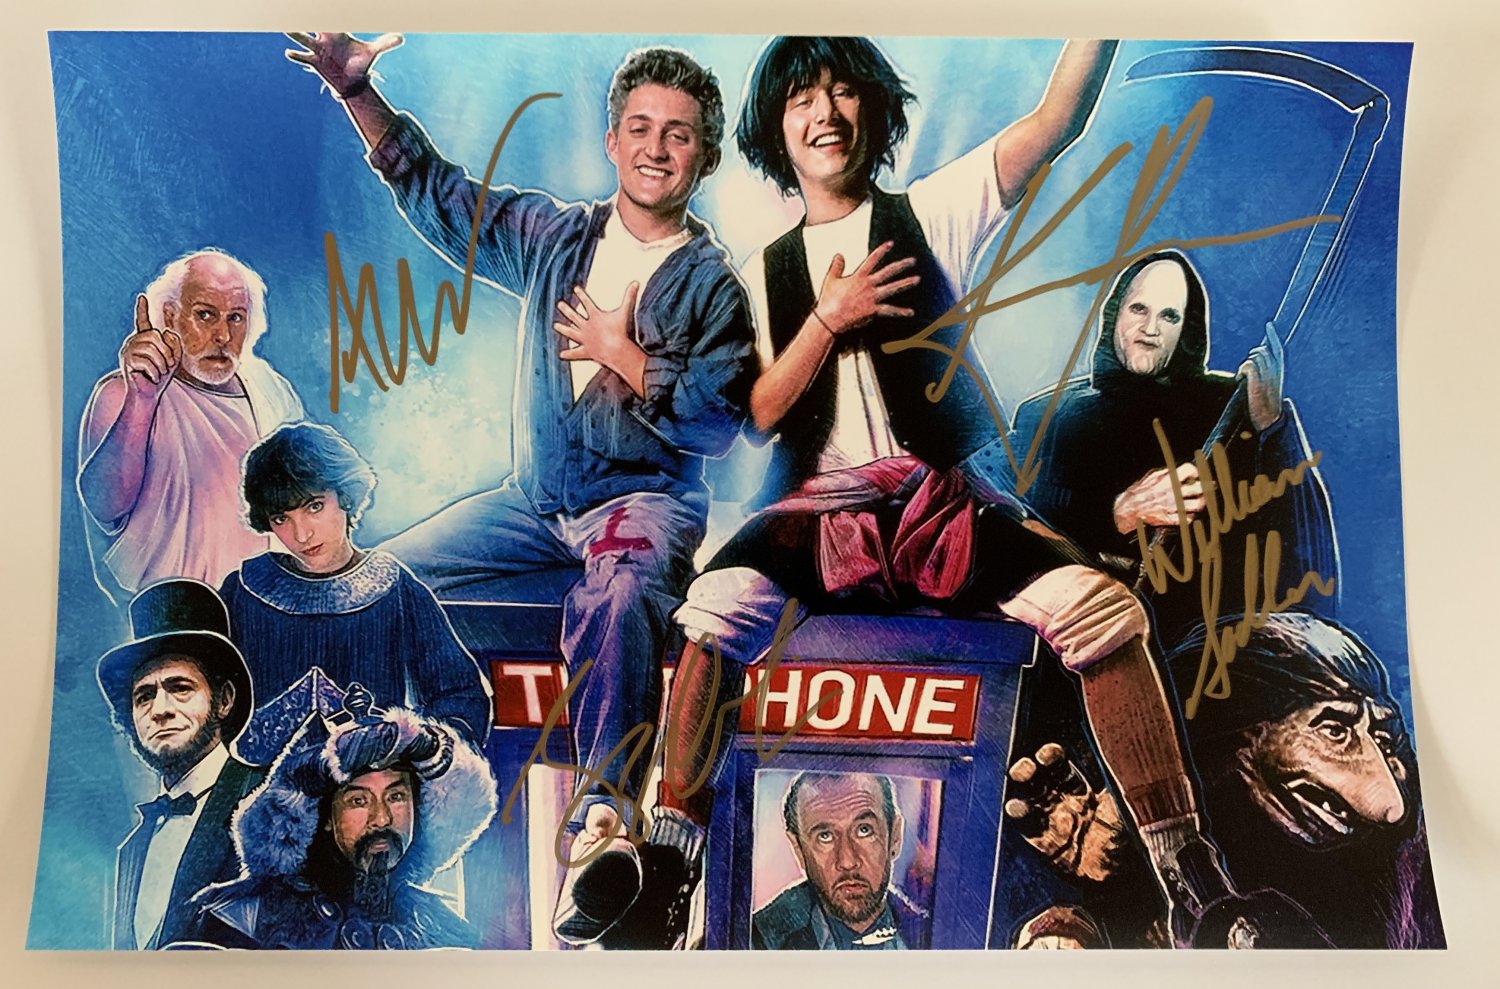 Bill and Ted's Excellent Adventure cast signed autographed 8x12 photo Keanu Reeves photograph